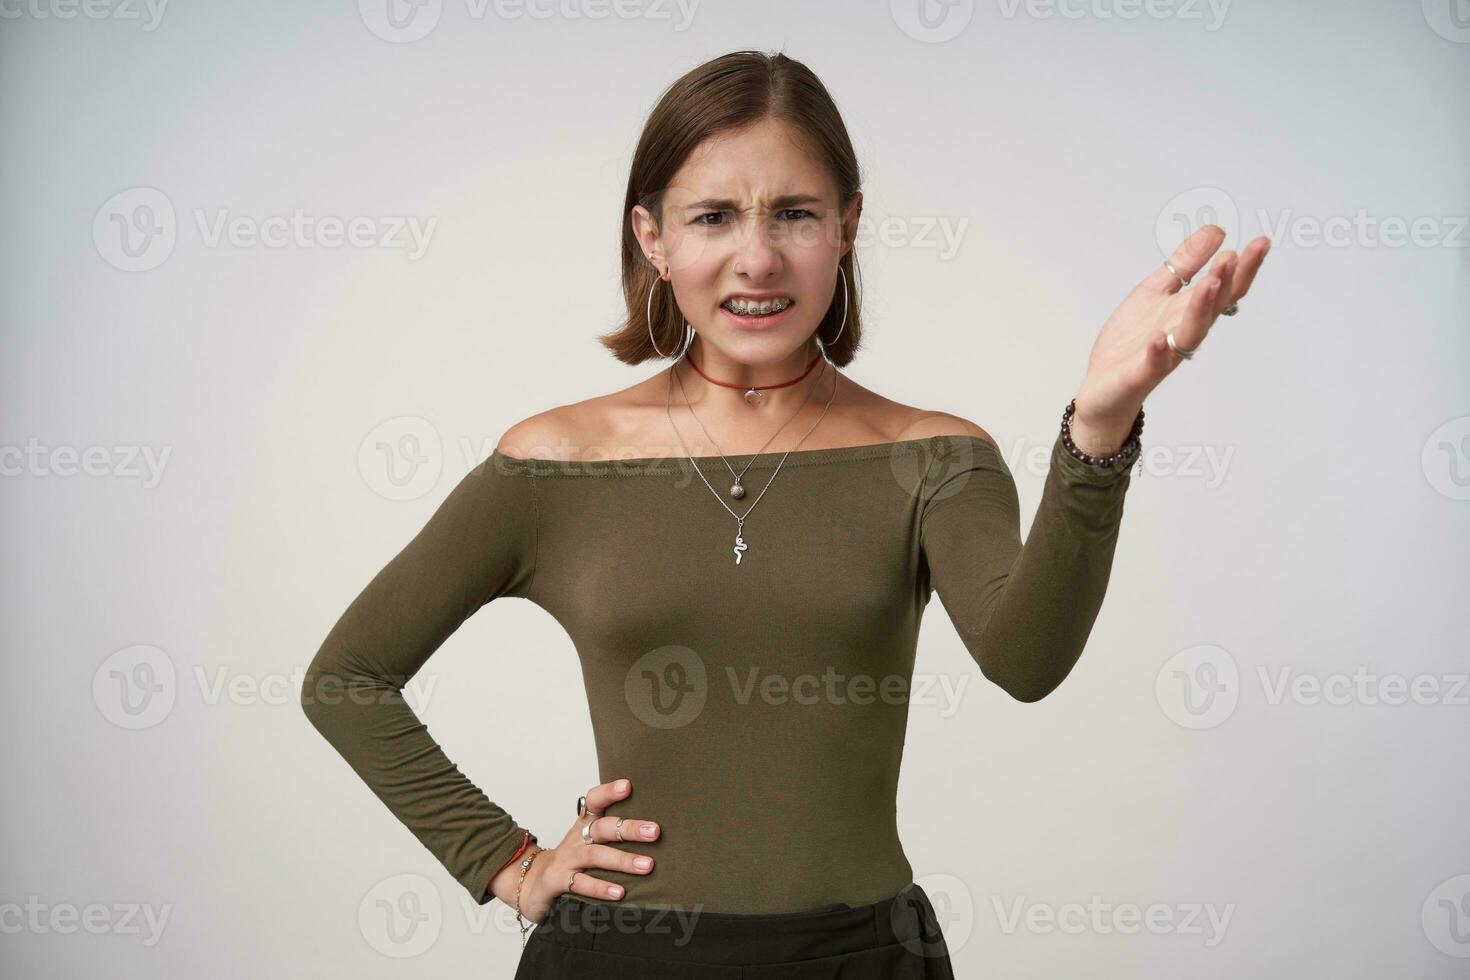 Disgruntled young short haired brunette woman with casual hairstyle keeping her hand raised while looking discontentedly at camera, isolated over white background photo